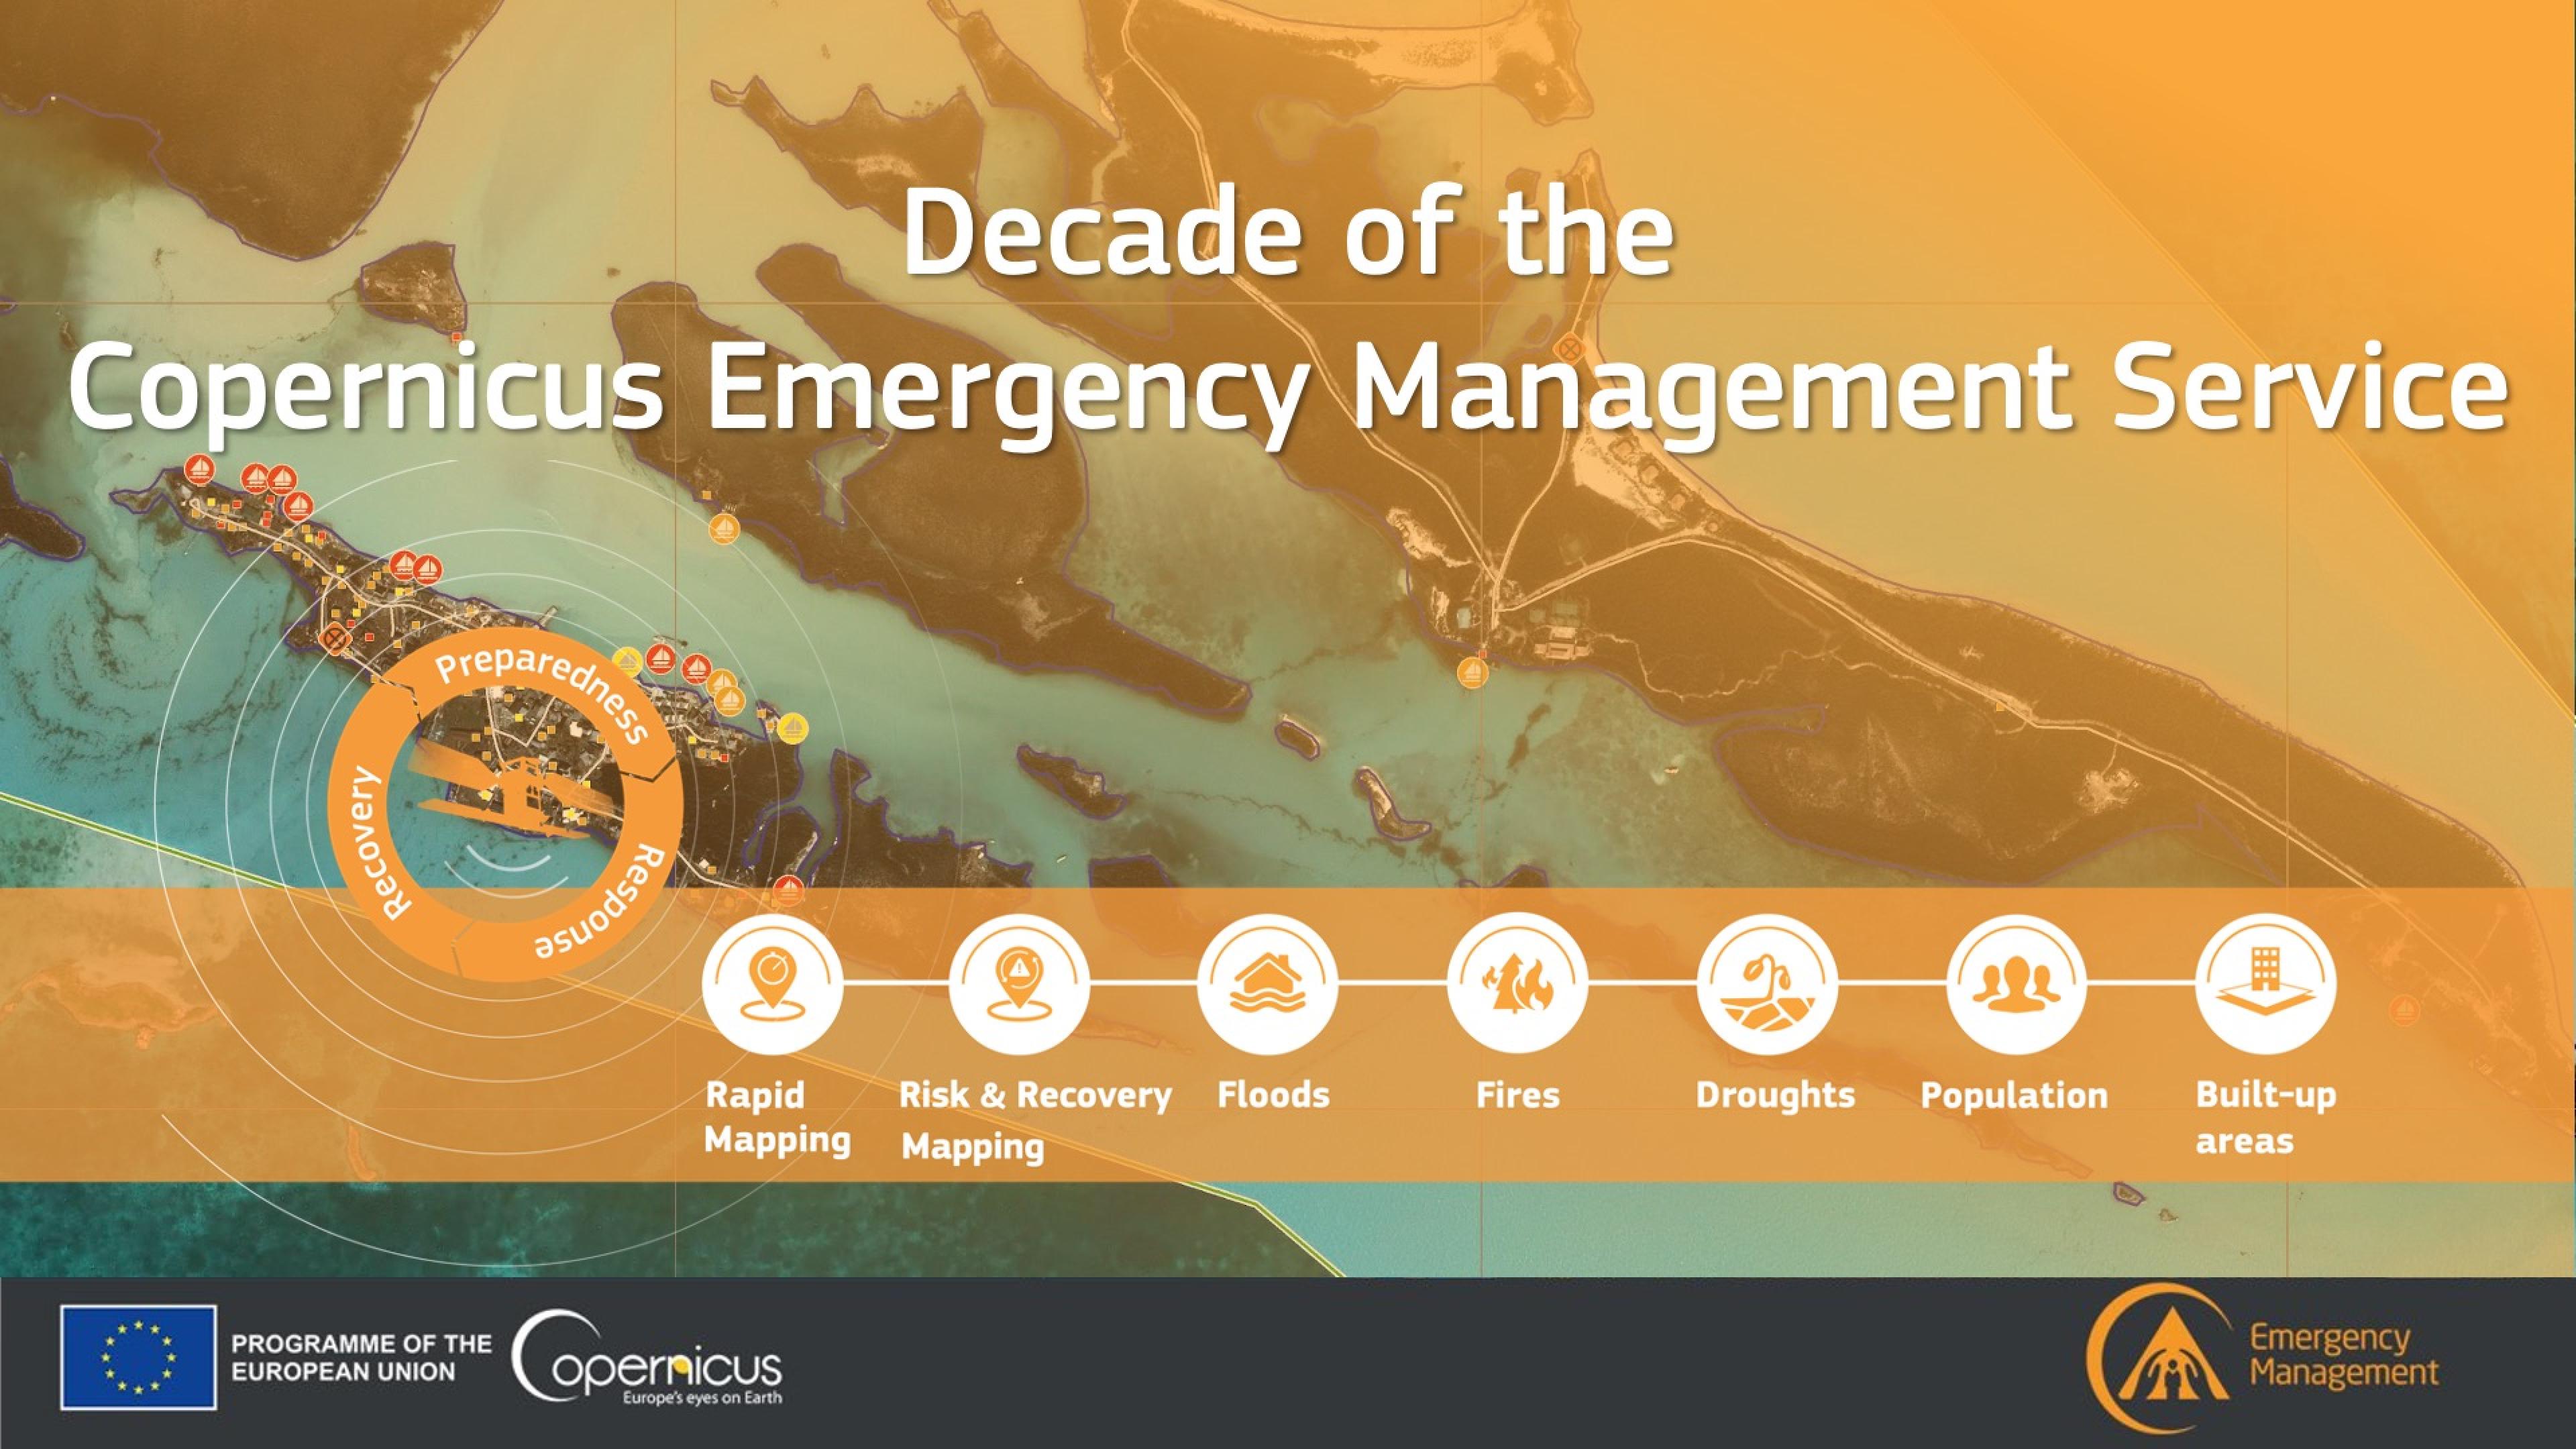 Implementing science to save lives: A Decade of the Copernicus Emergency Management Service